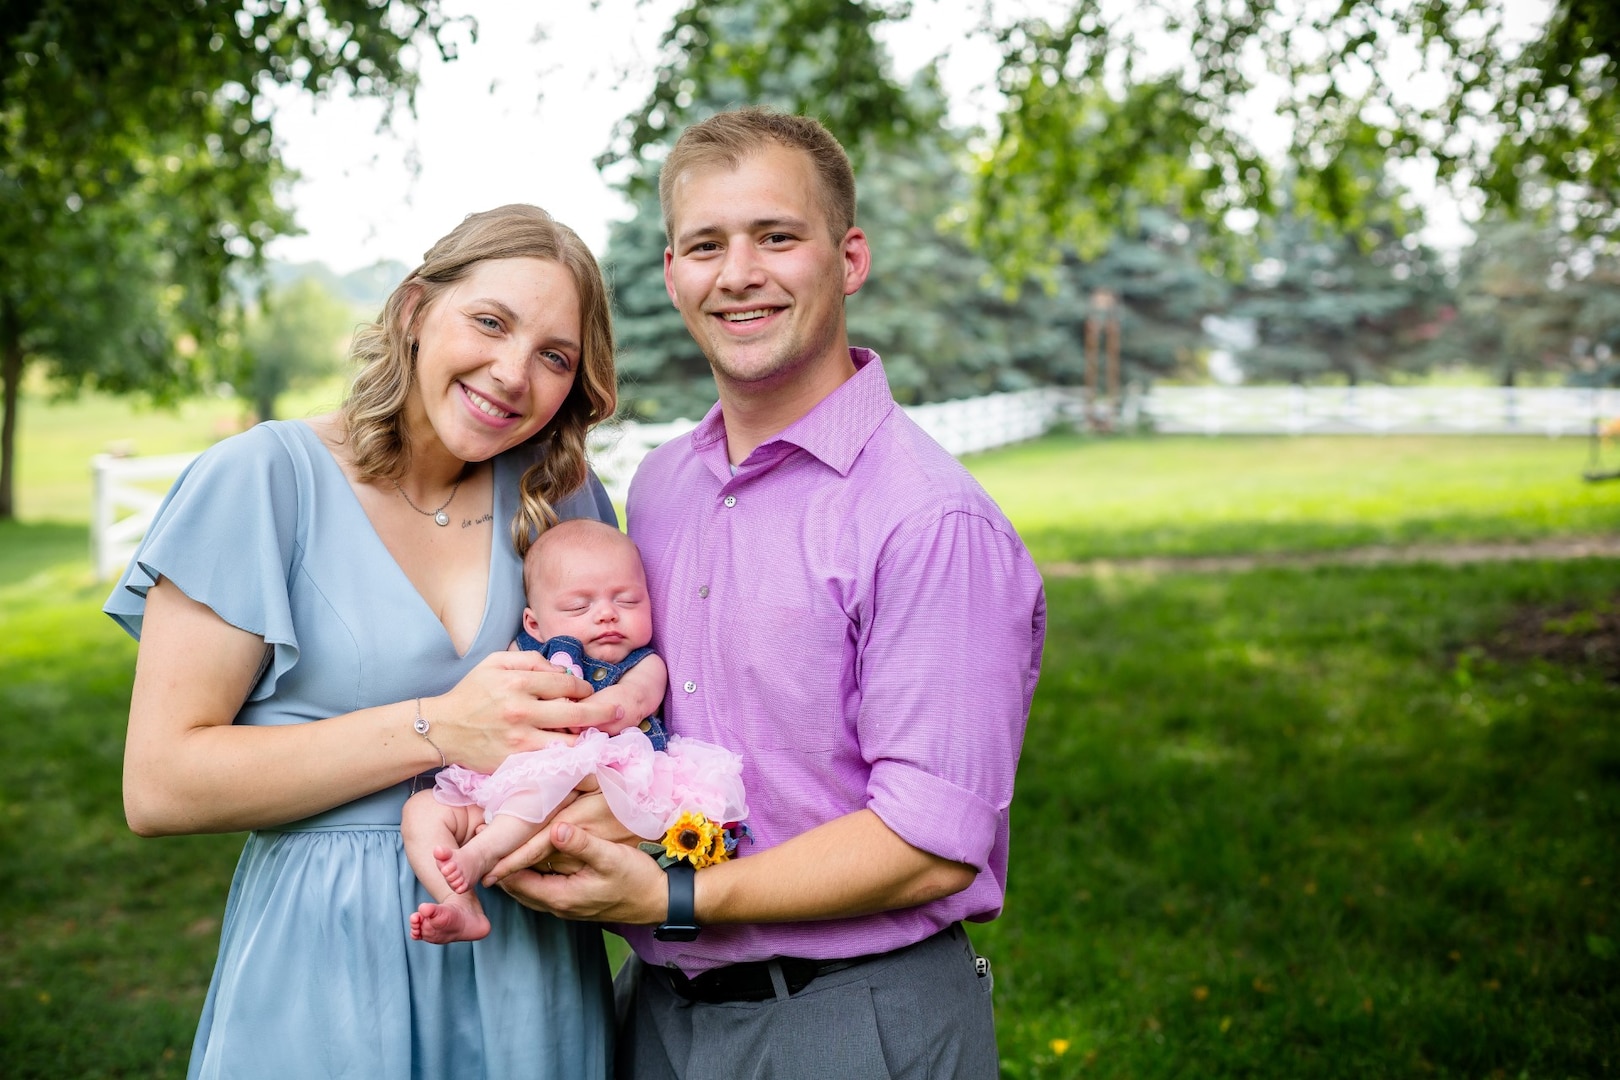 Spc. Becca Nikolas of the Minnesota National Guard and her husband hold their infant daughter.